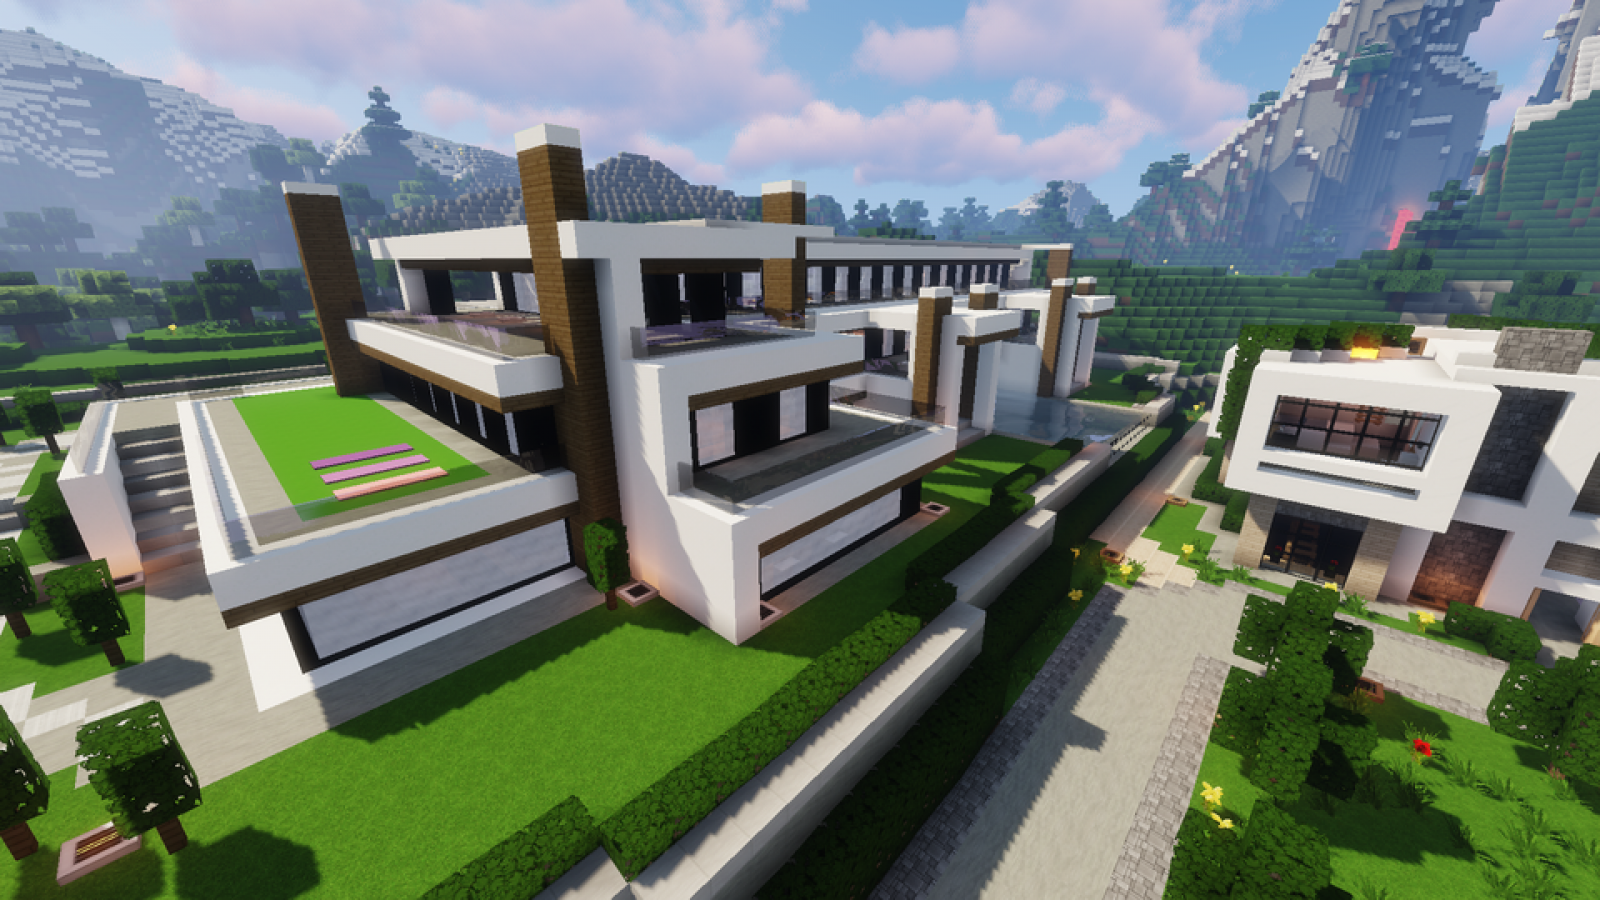 Modern Minecraft Houses: 10 Building Ideas To Stoke Your Imagination